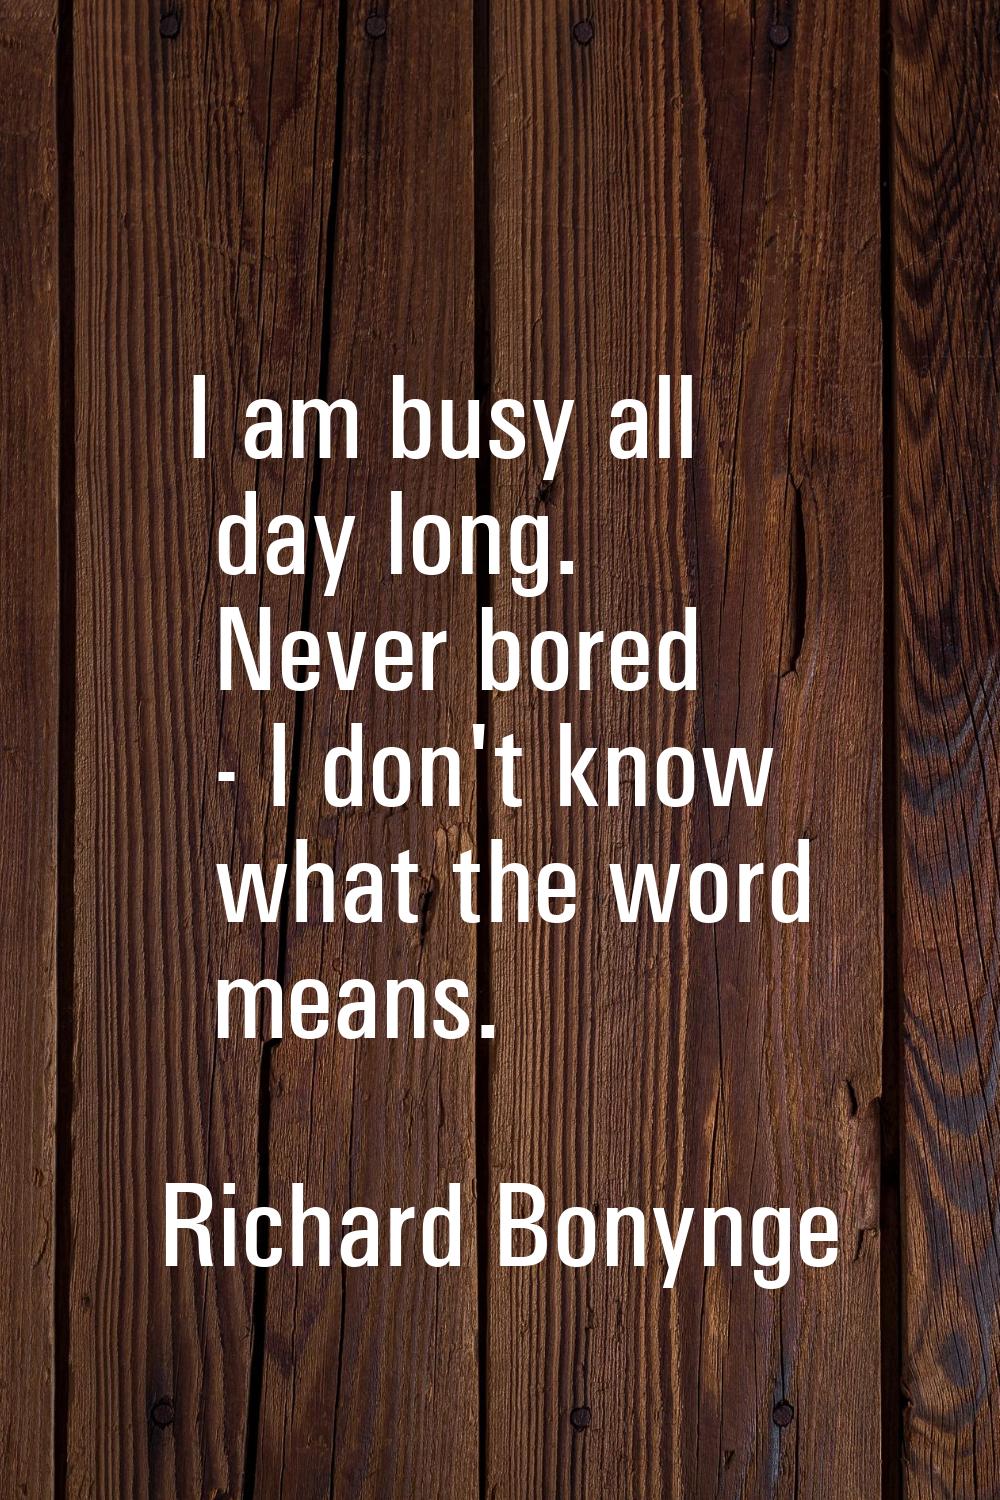 I am busy all day long. Never bored - I don't know what the word means.